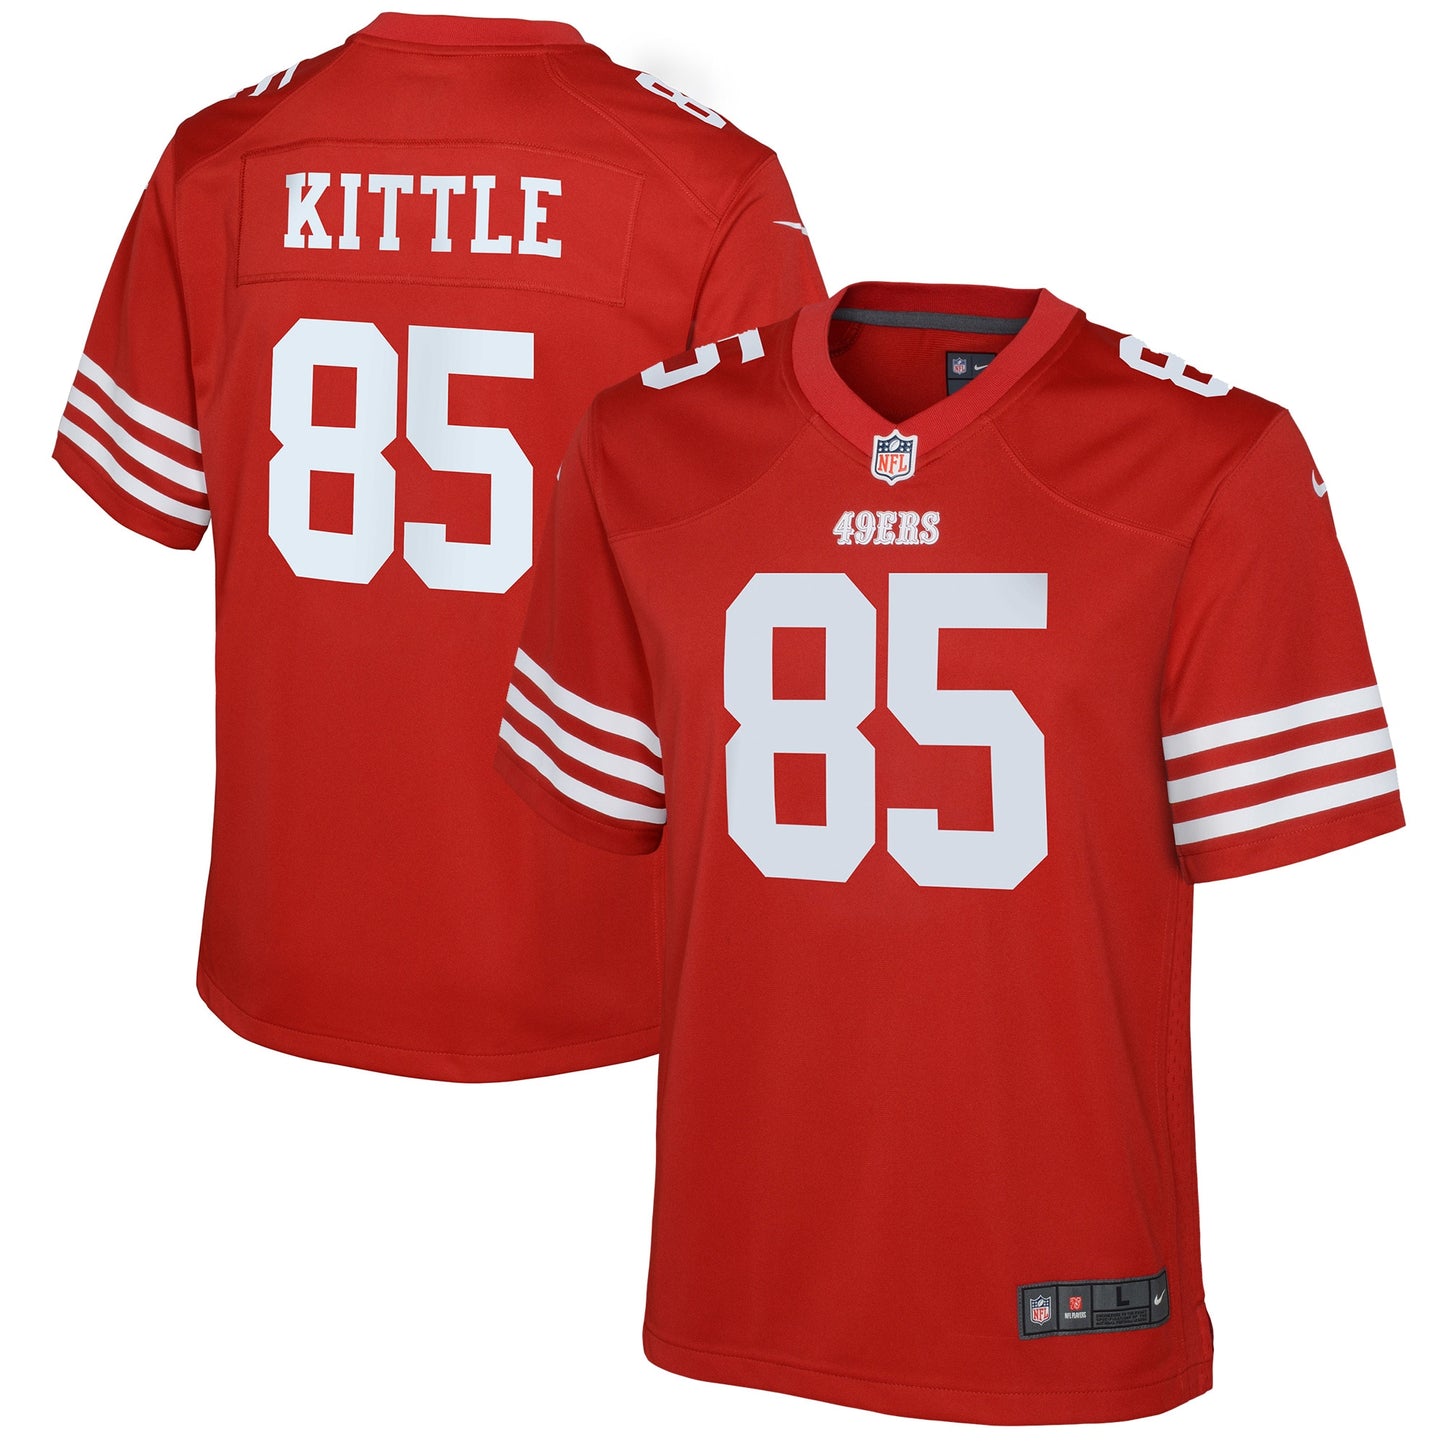 George Kittle San Francisco 49ers Nike Youth Game Jersey - Scarlet